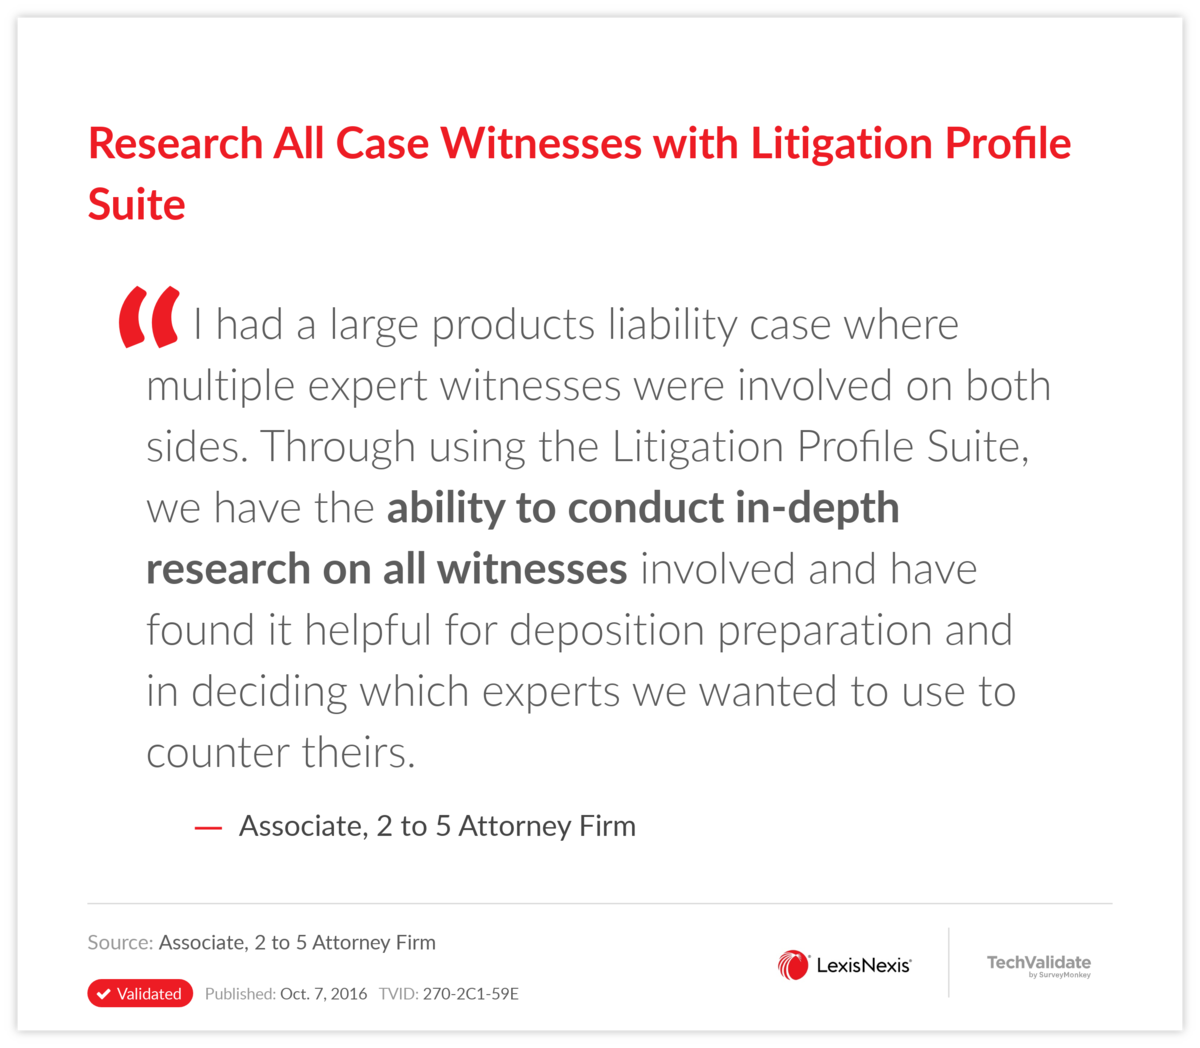 Research All Case Witnesses with Litigation Profile Suite